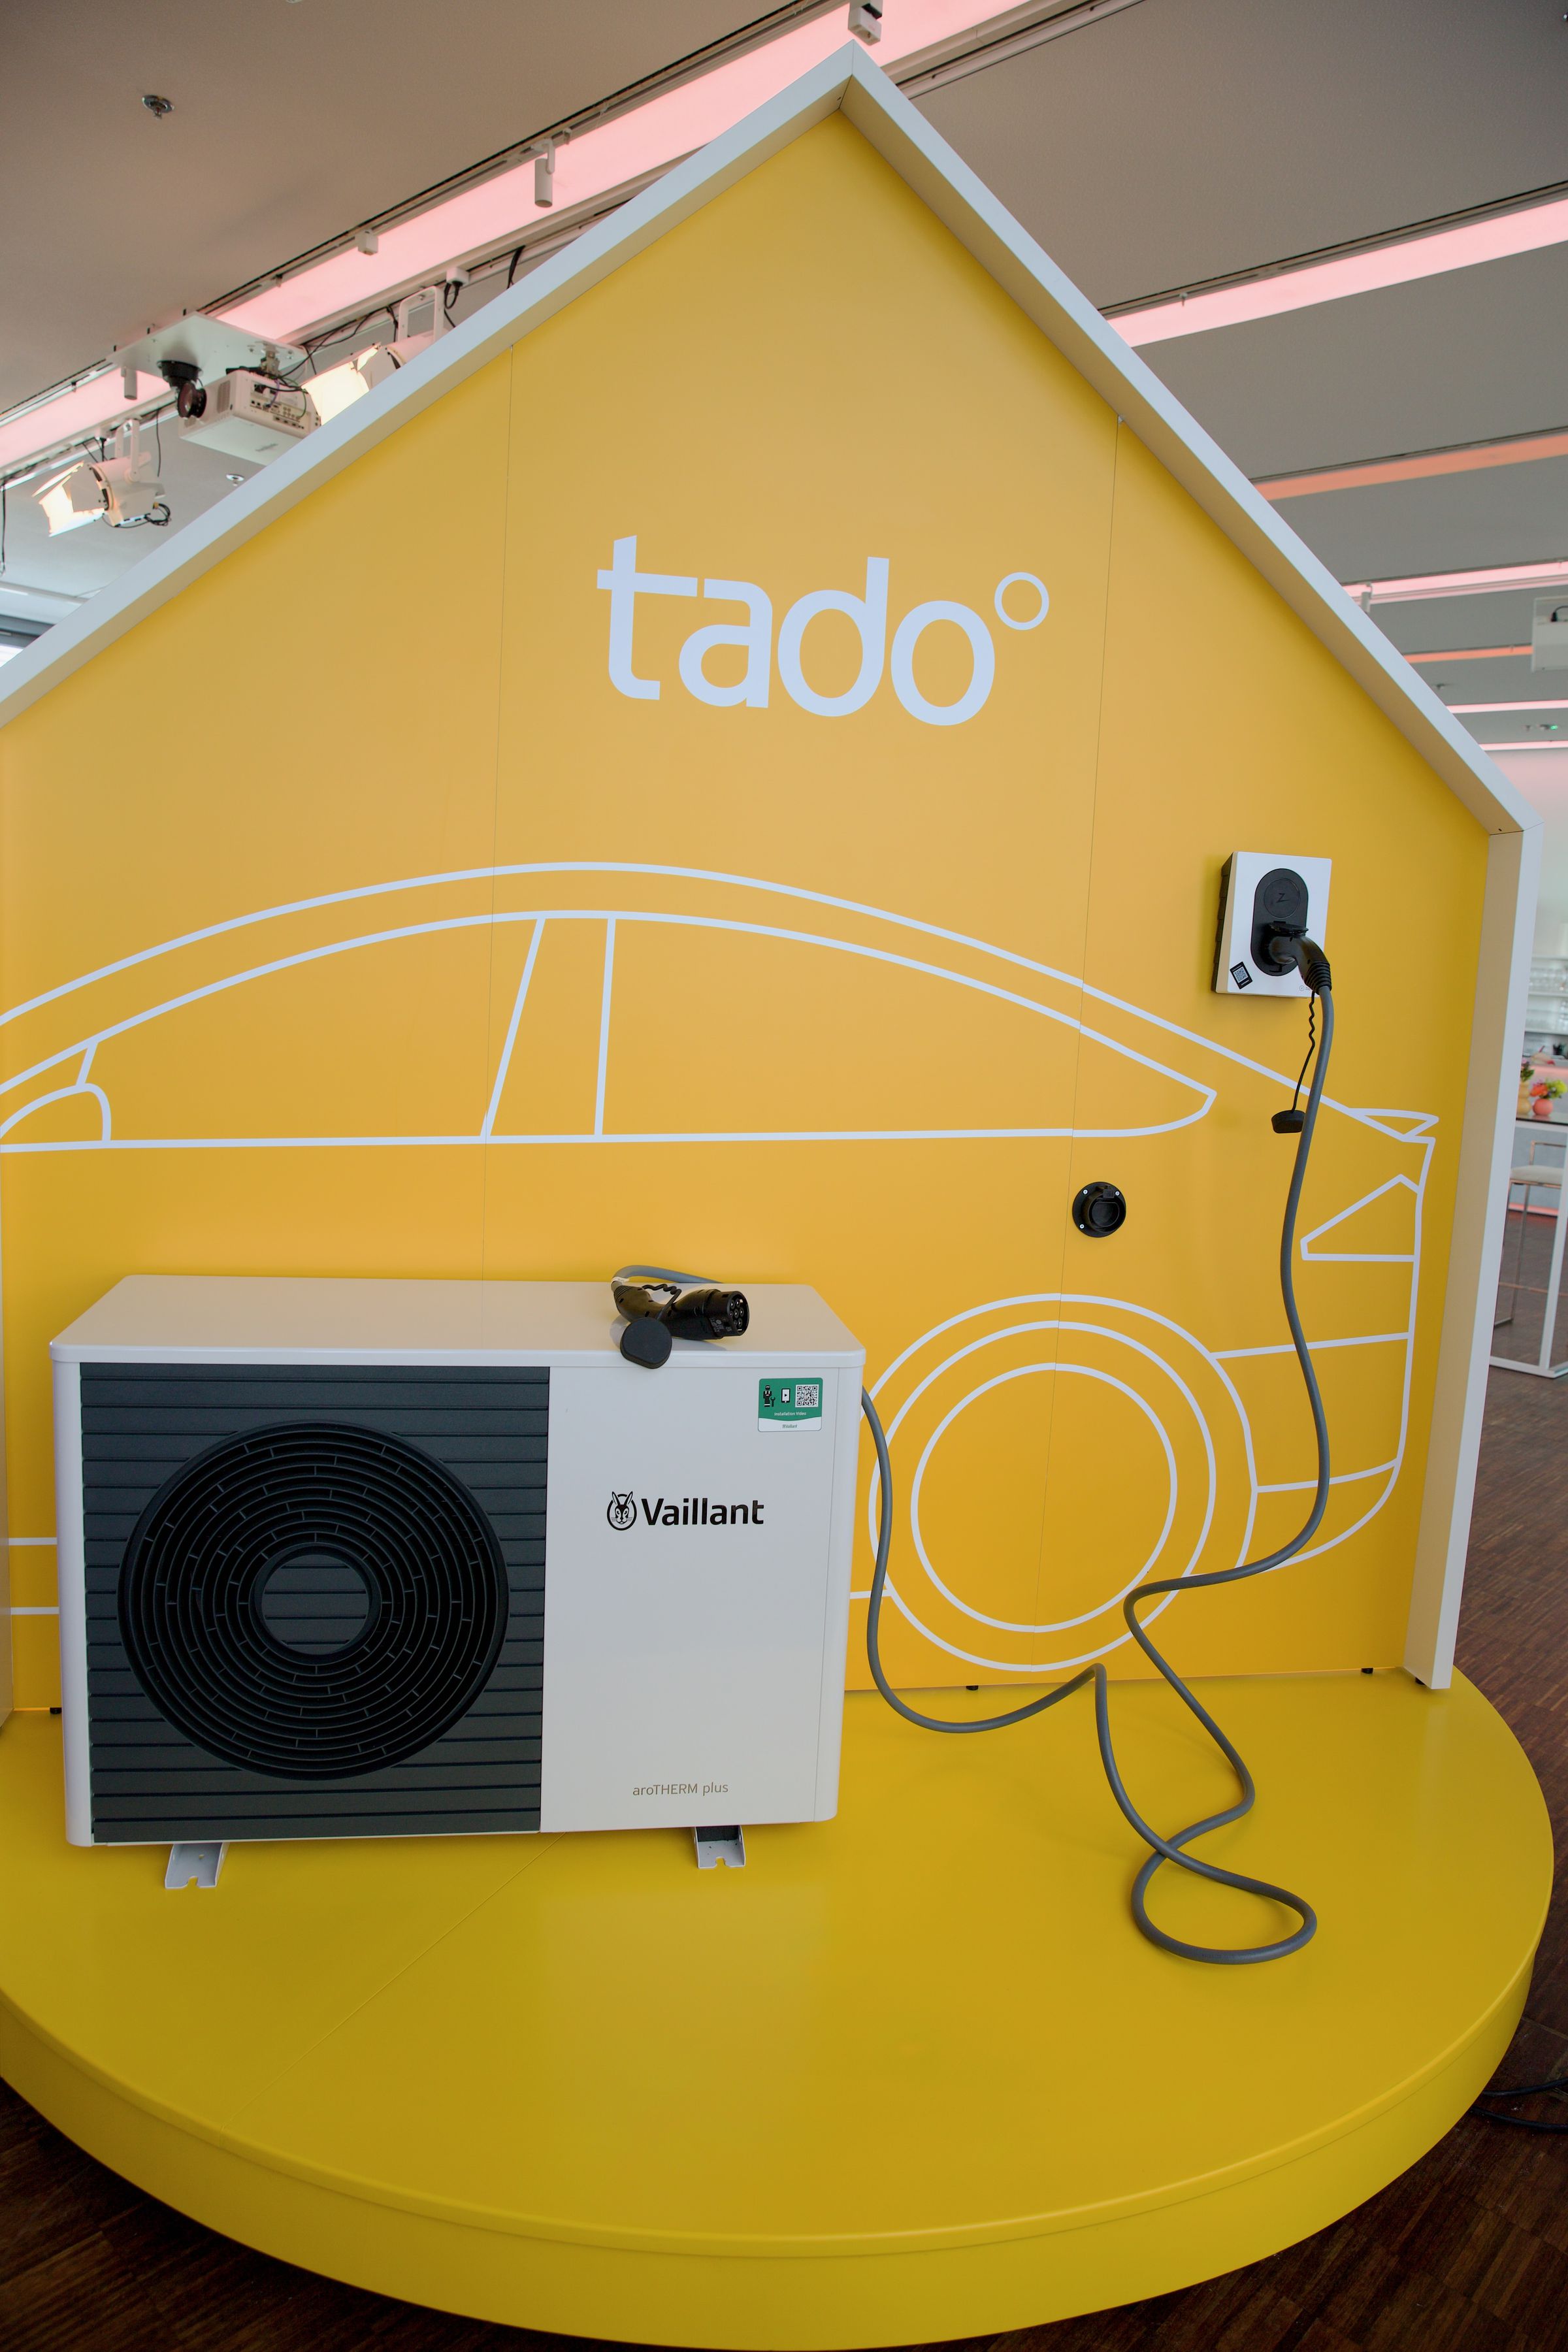 European smart energy company Tado launched a new smart heat pump controller and EV charging app.